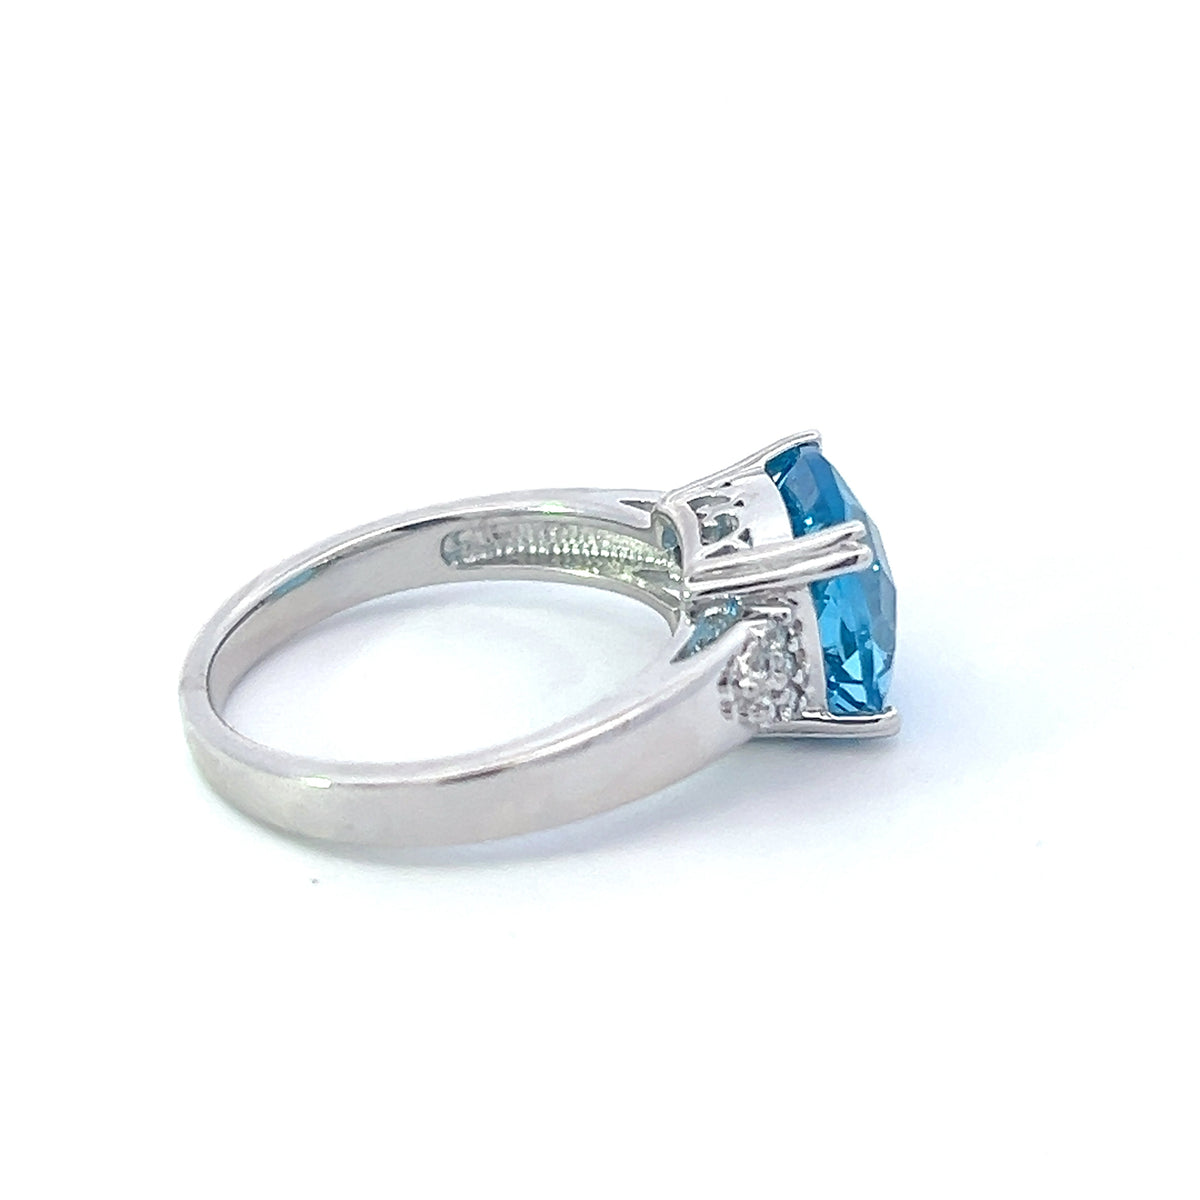 10K White Gold  9mm Blue Topaz and 0.10cttw Diamond Ring - Size 6